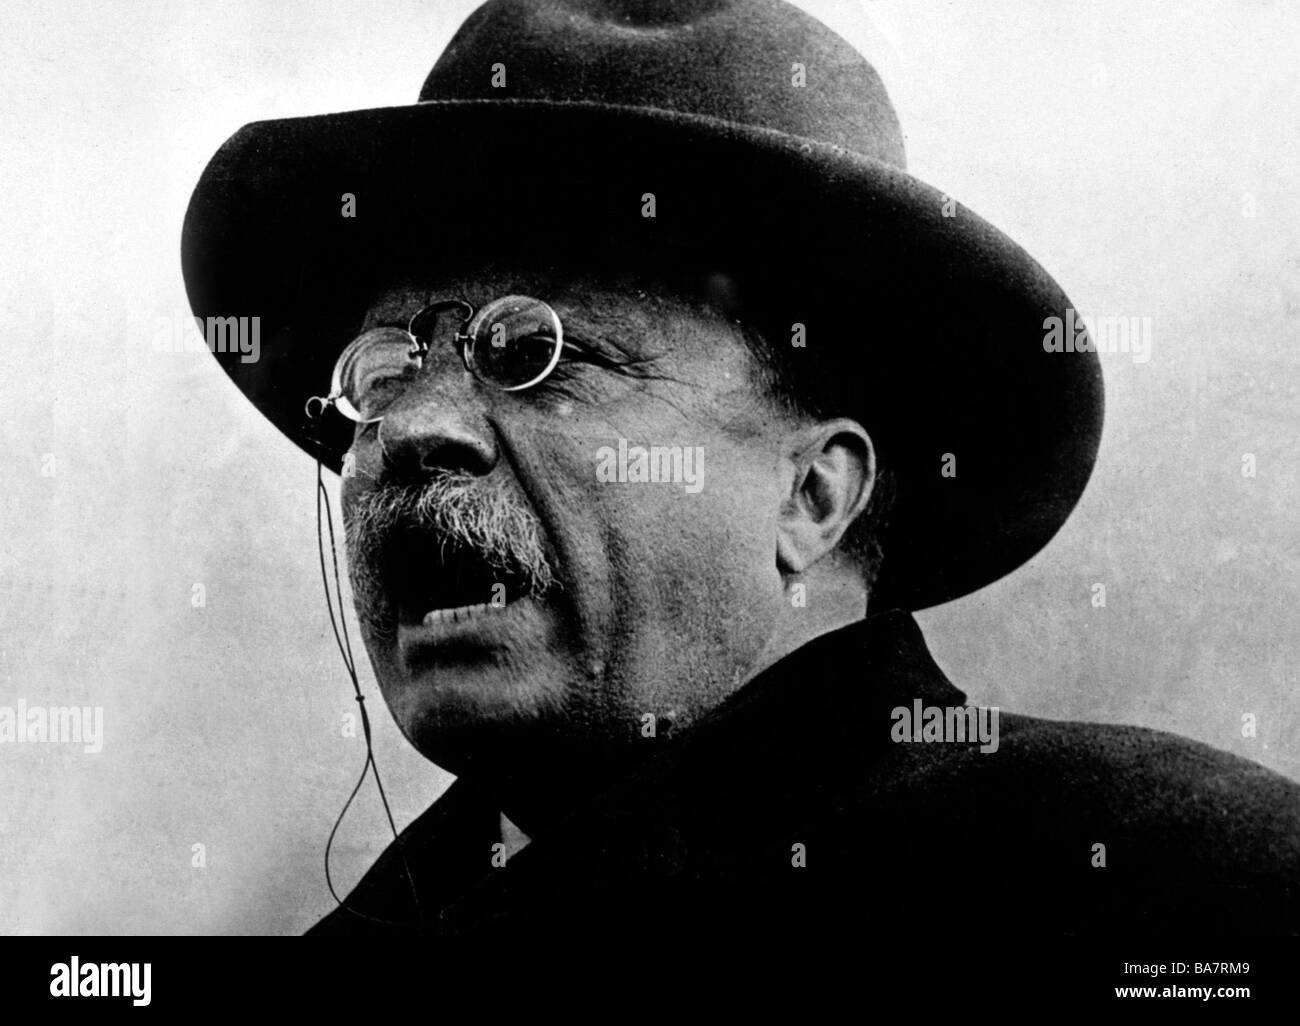 Roosevelt, Theodore "Teddy", 27.10.1858 - 6.1.1919, American politician (Rep.), 26th President of the USA 1901 - 1909, portrait, giving a speech, circa 1905, Stock Photo